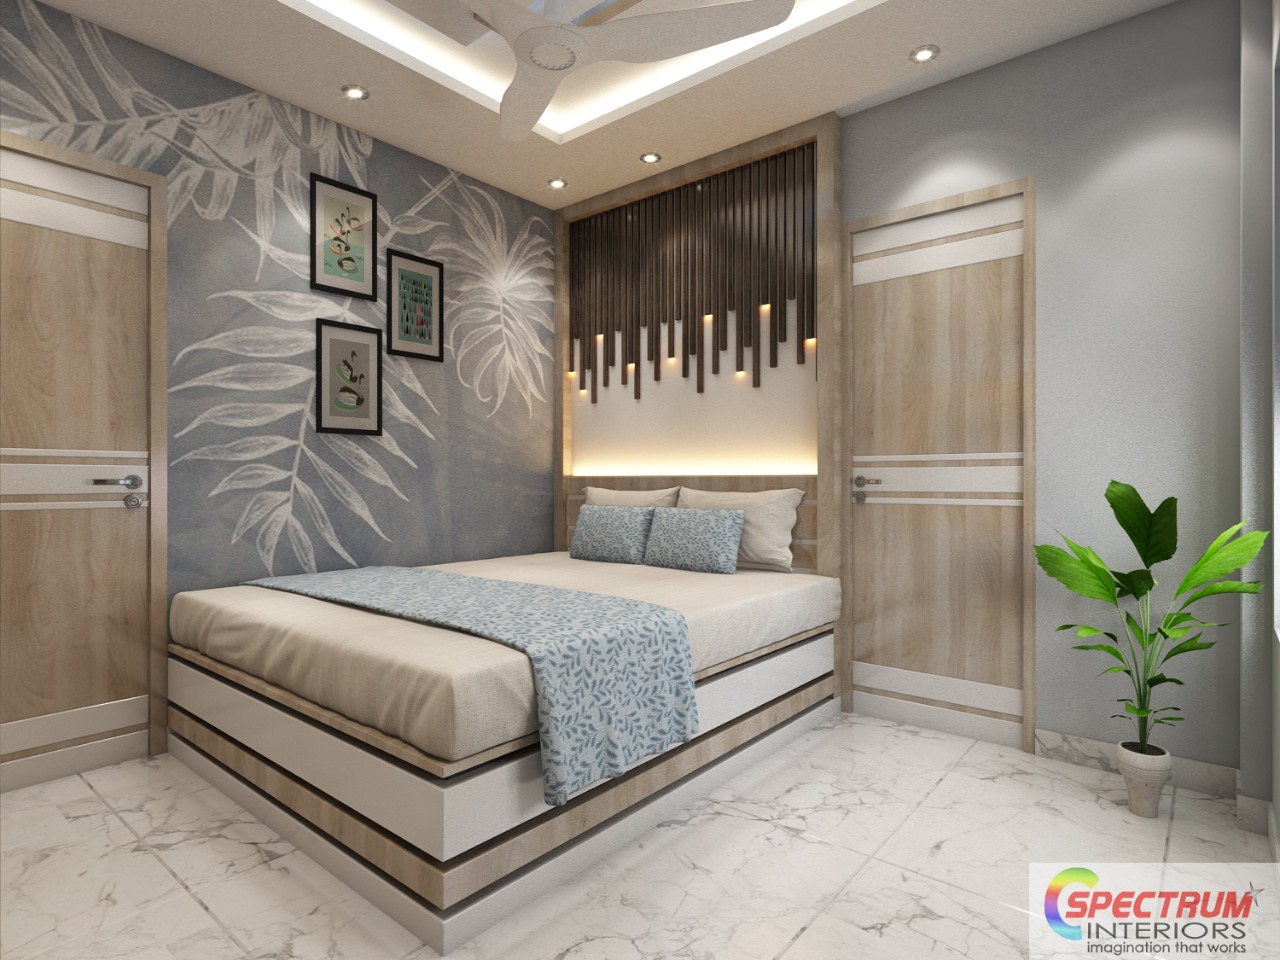 Know-How to Decorate Your Small Bedroom from Best Interior Designers